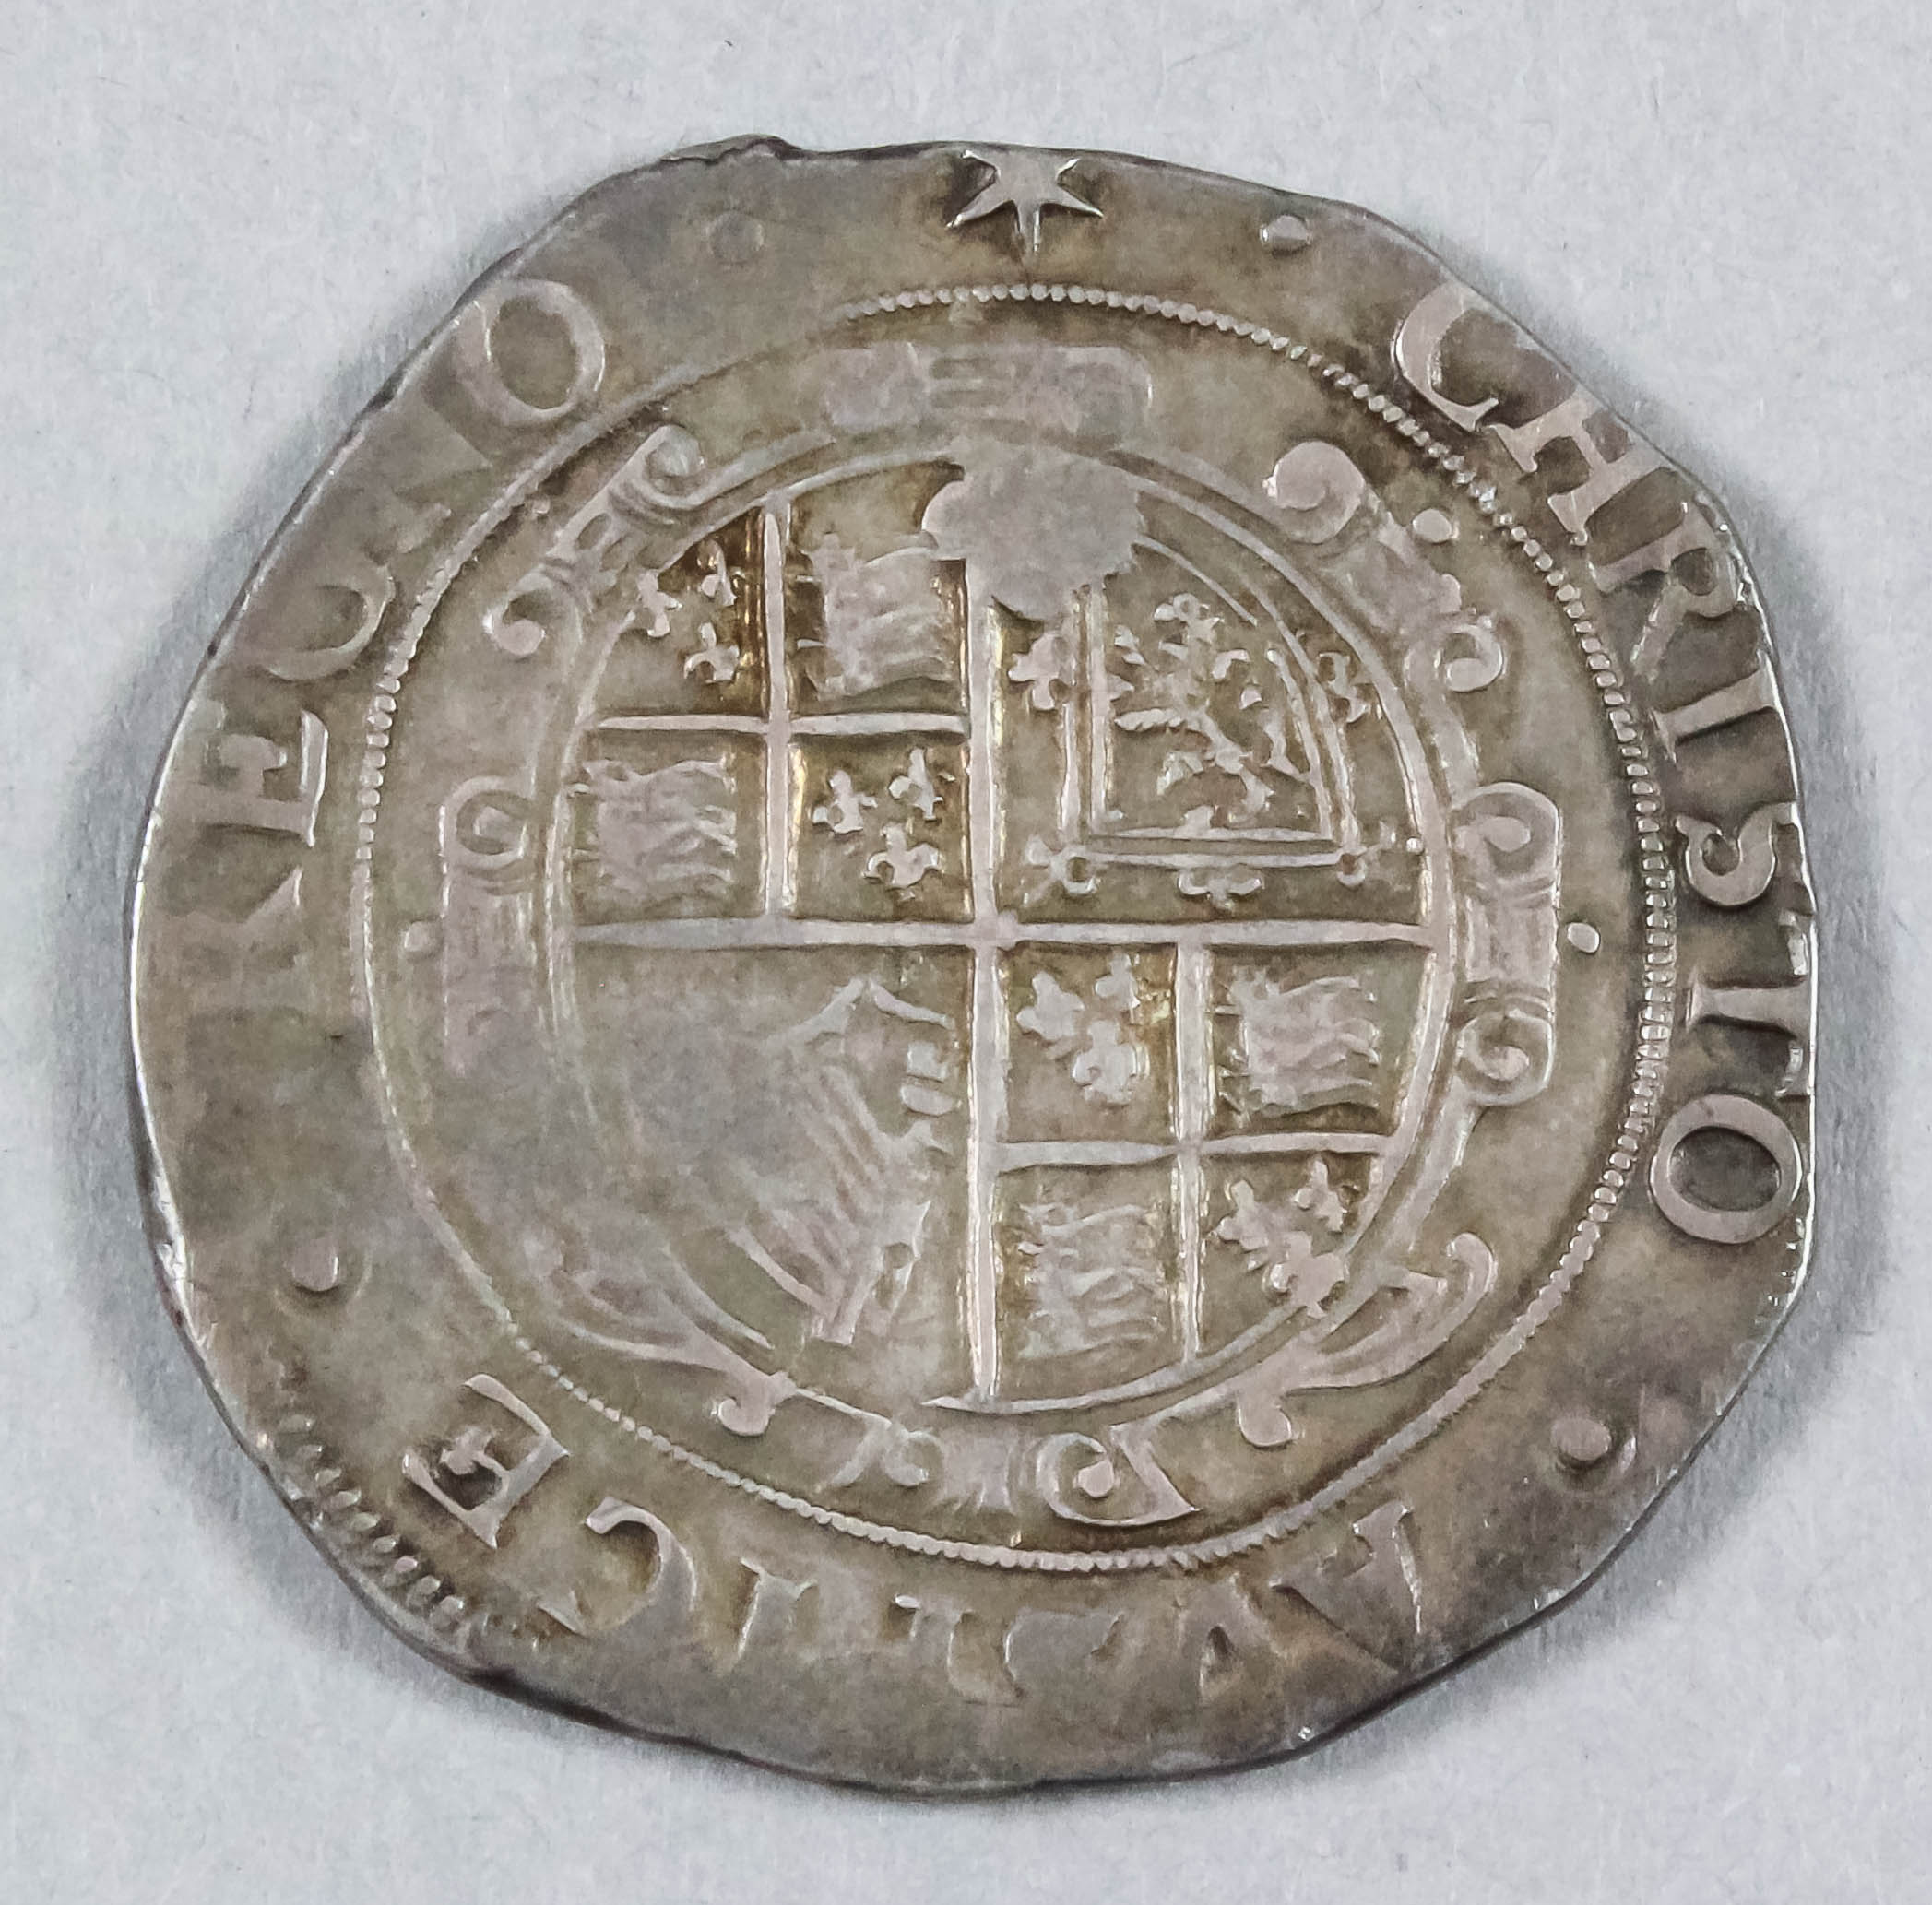 A Charles I (1625-1649) silver half Crown, mint mark Star (1640-1641), approximately 33.9mm diameter